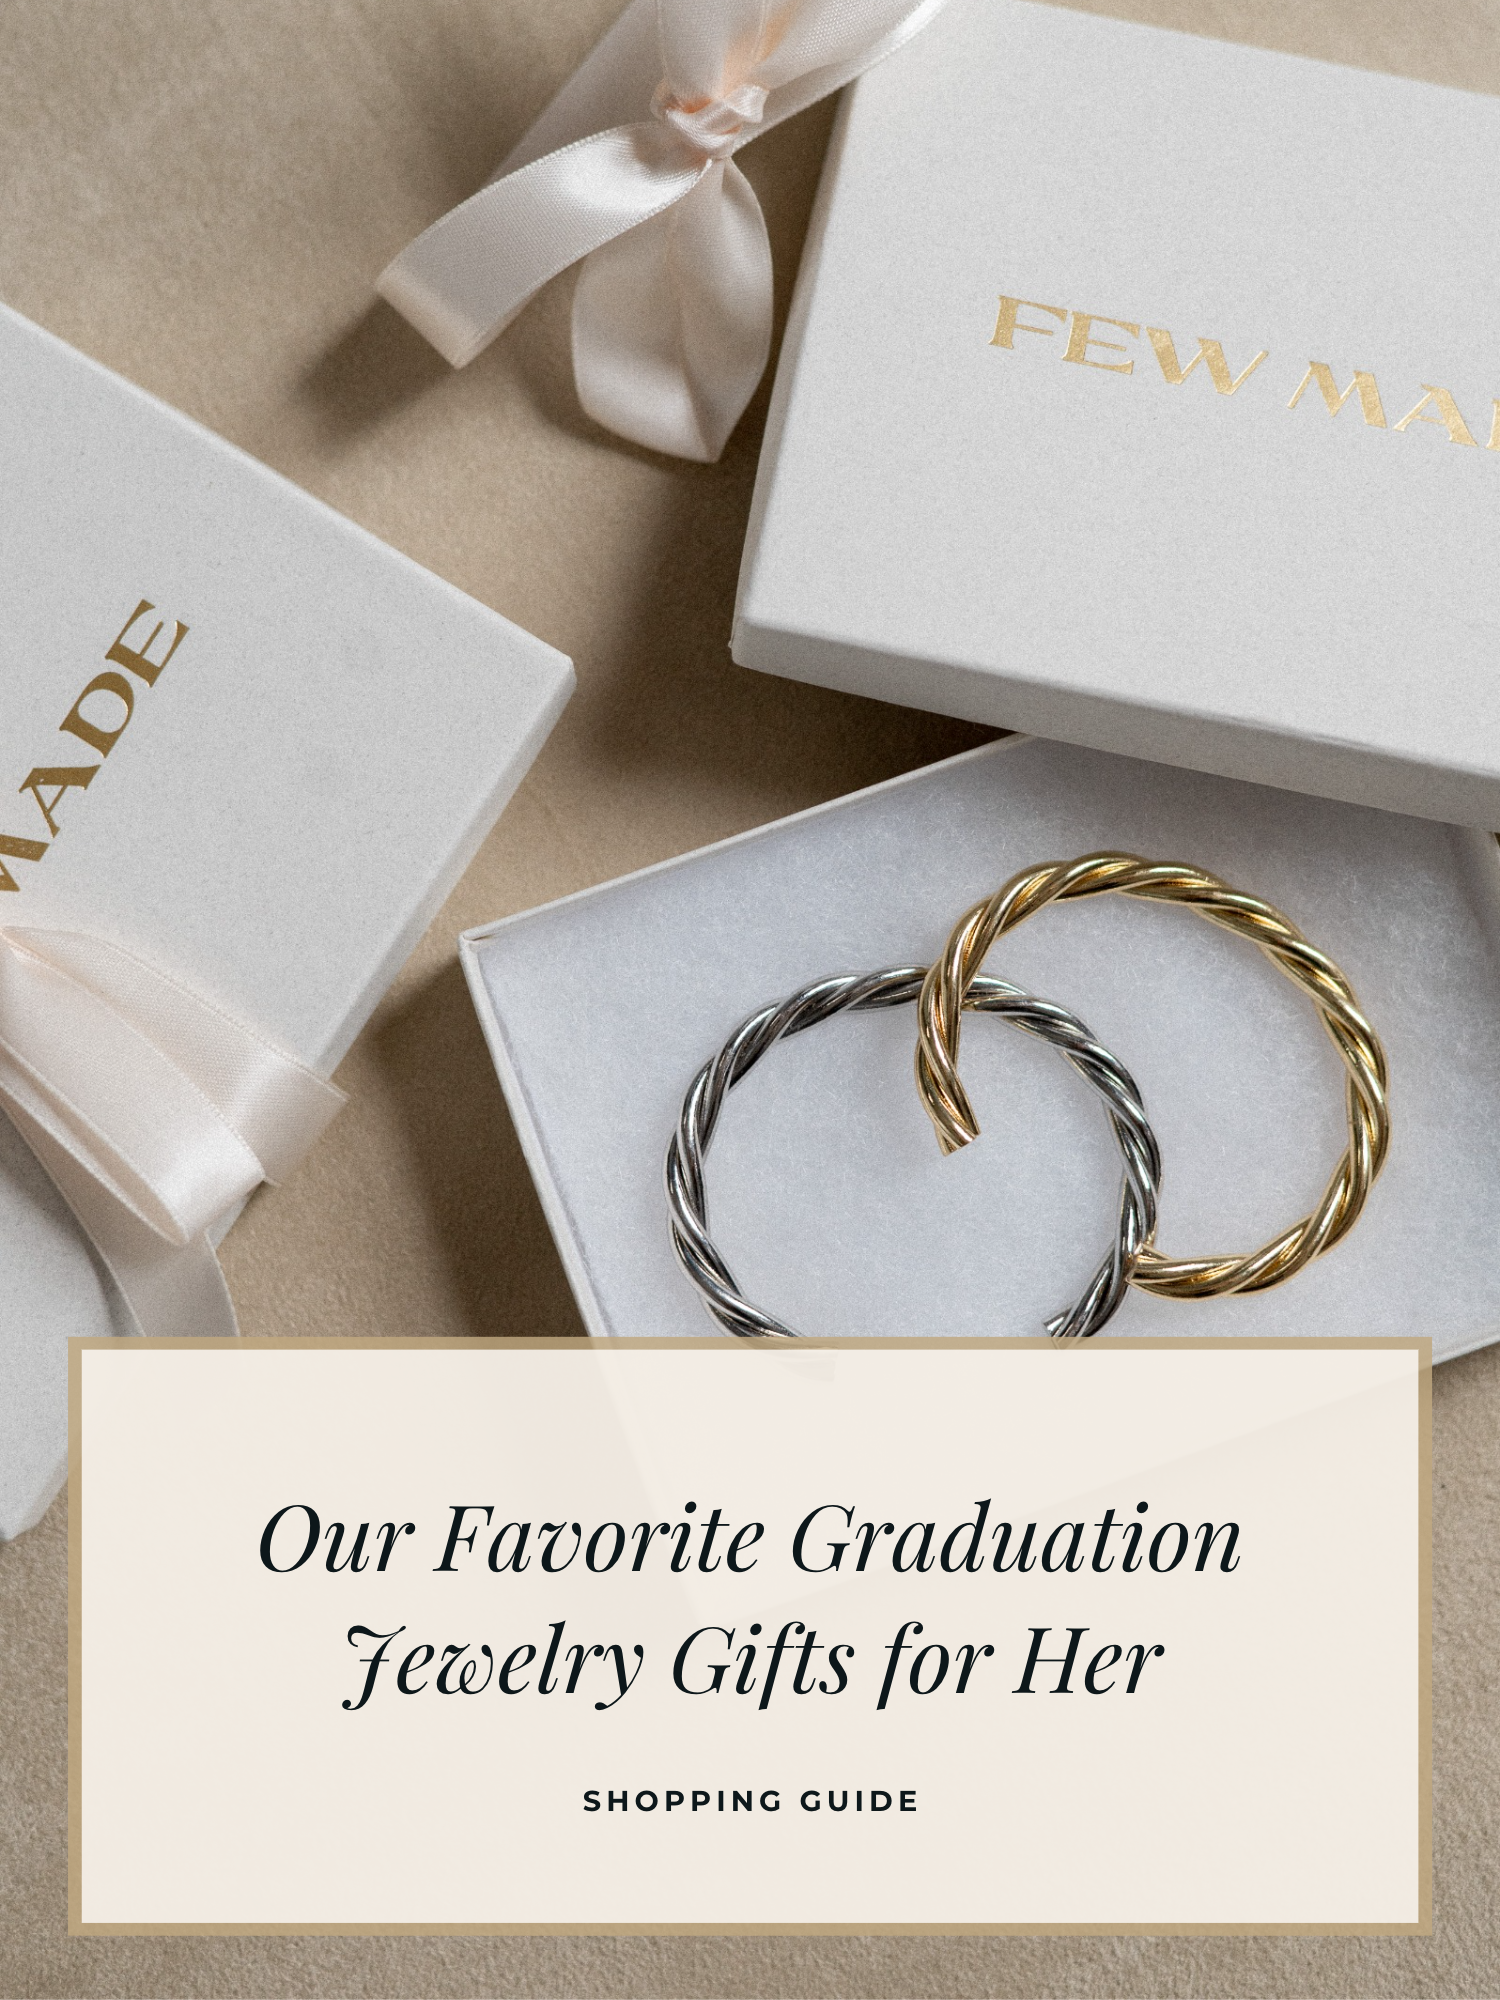 Our Favorite Graduation Jewelry Gifts for Her